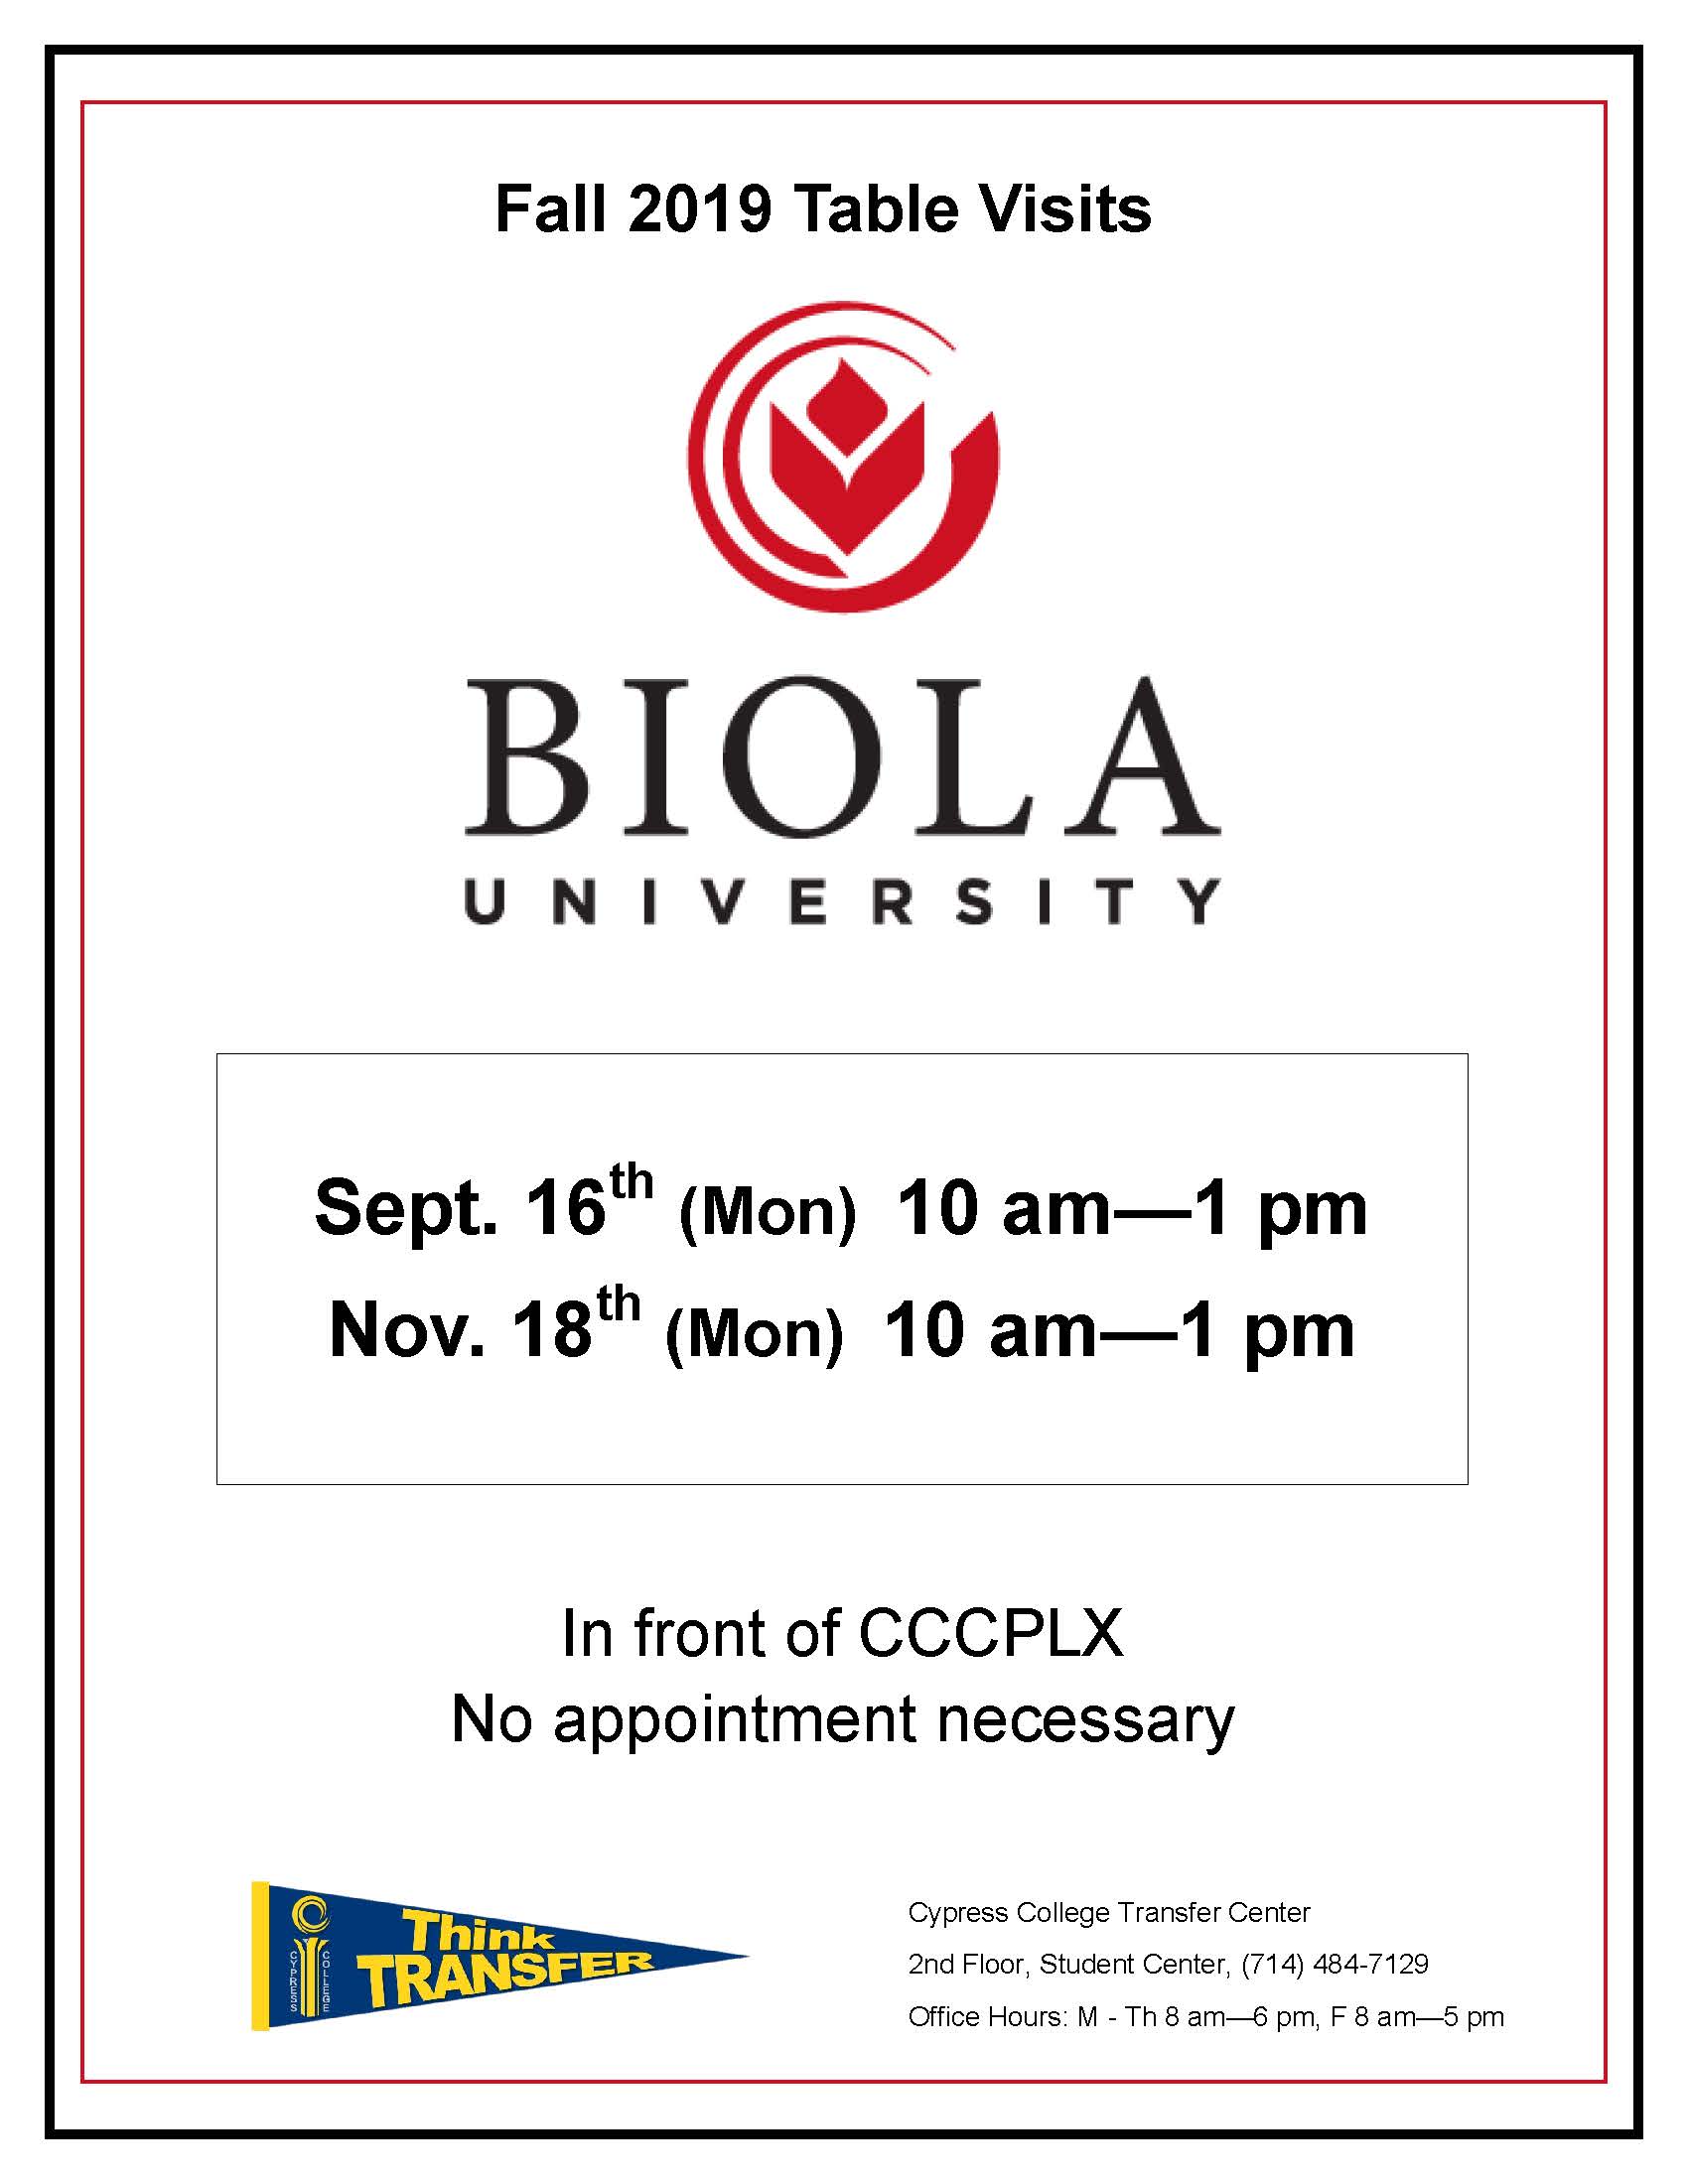 Flyer on white background with Biola University logo and transfer pennant